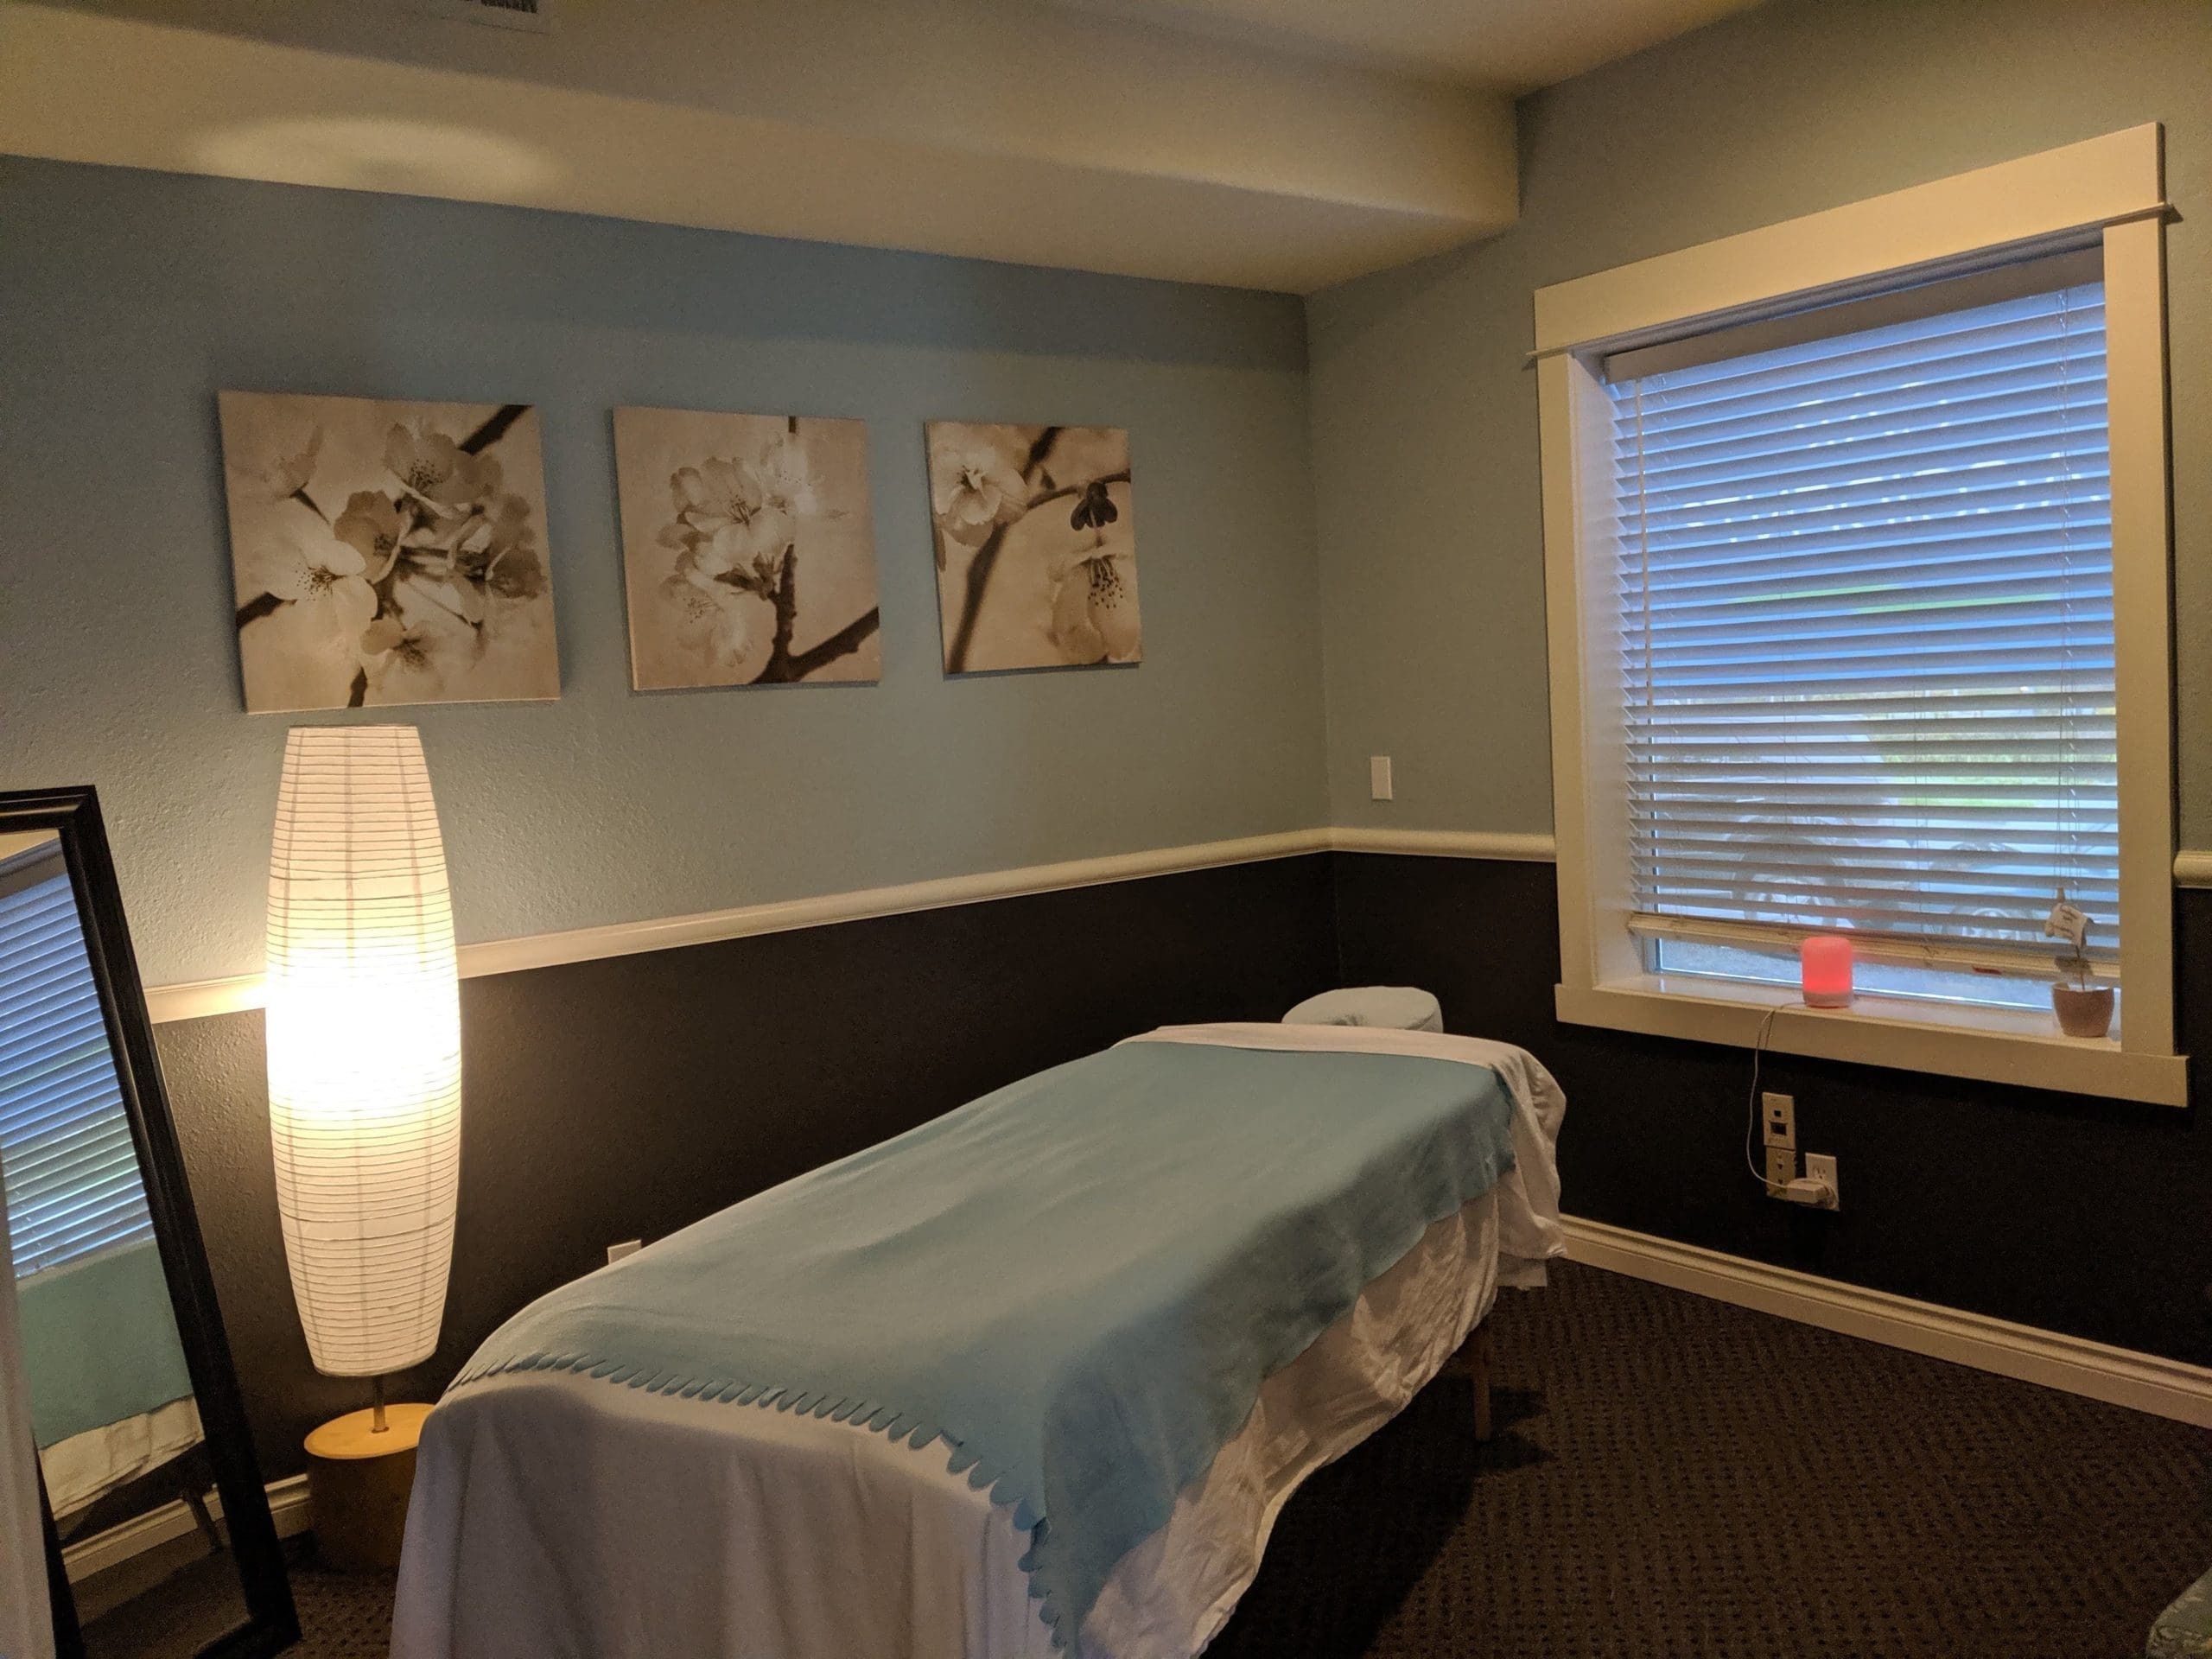 McMinnville Chiropractor massage therapy room with massage table, window and floral wall art.